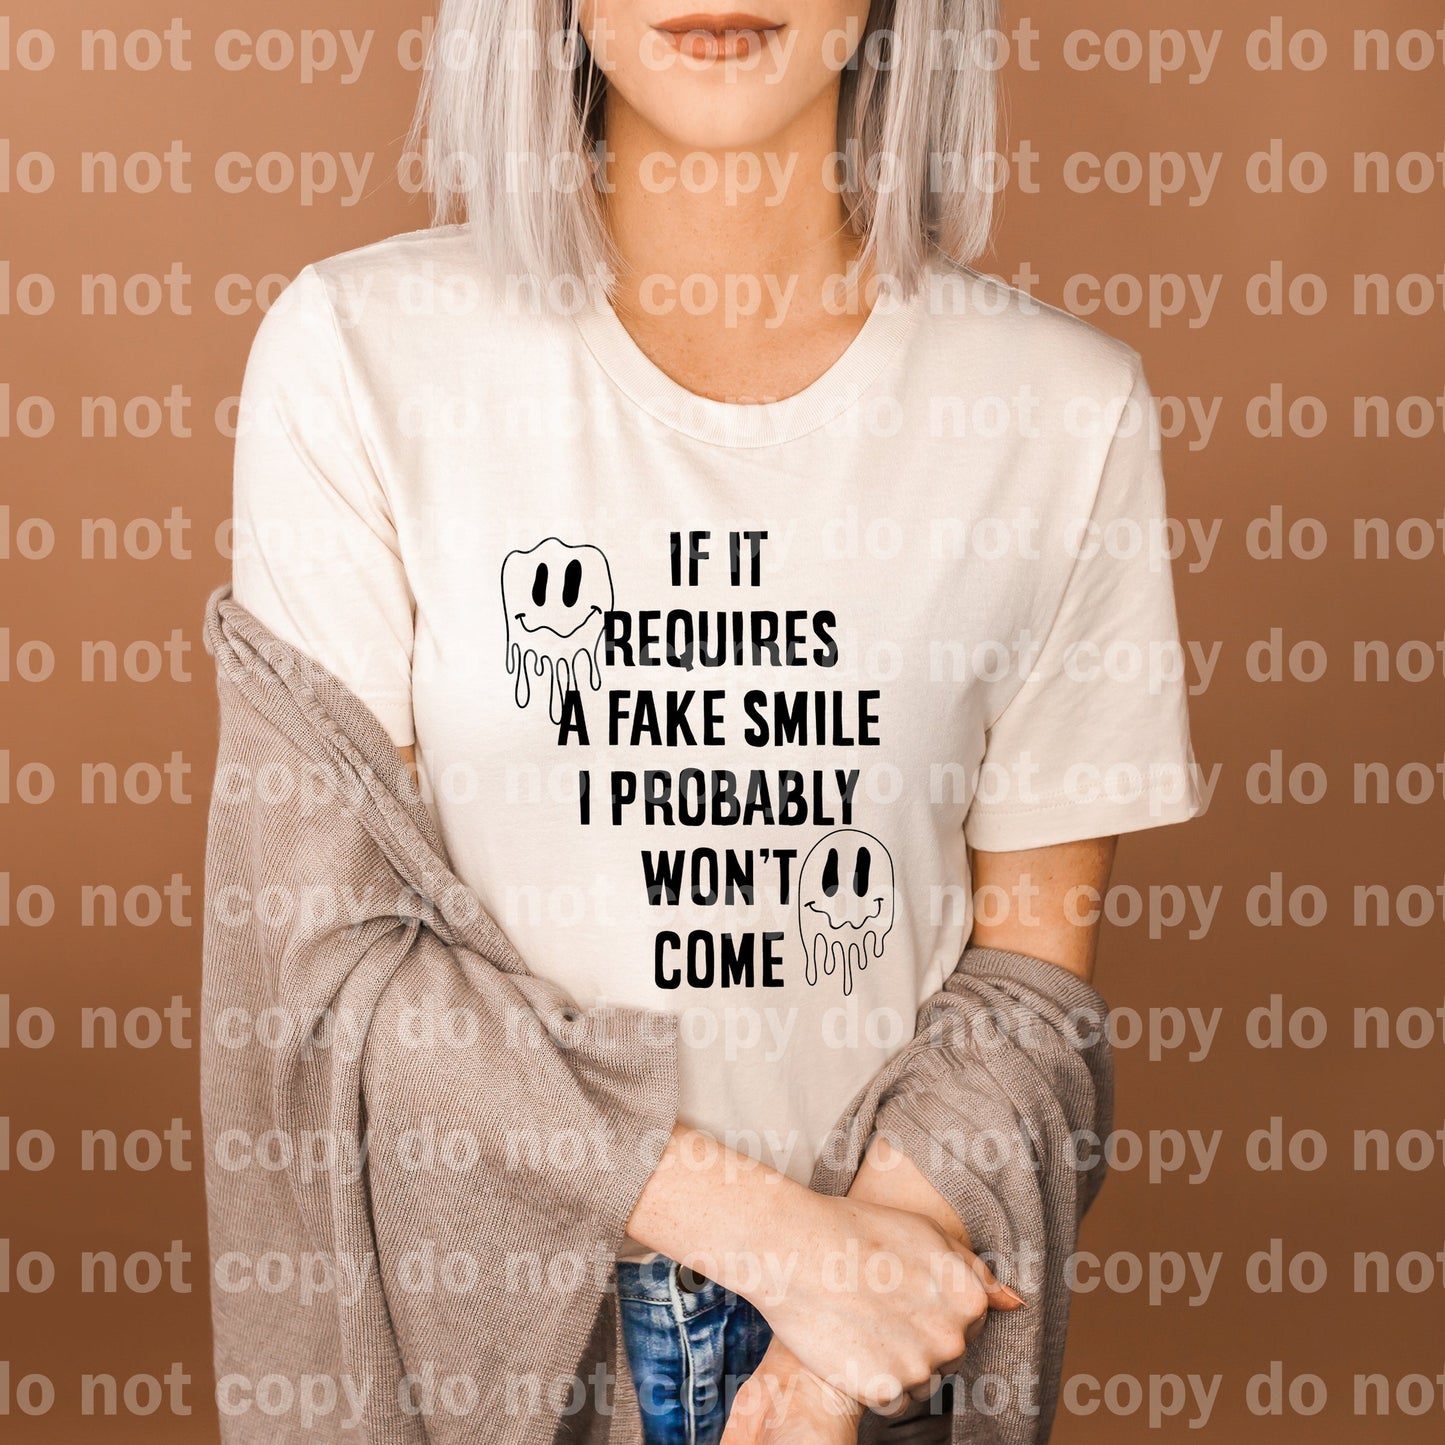 If It Requires A Fake Smile I Probably Won't Come Full Color/One Color Dream Print or Sublimation Print